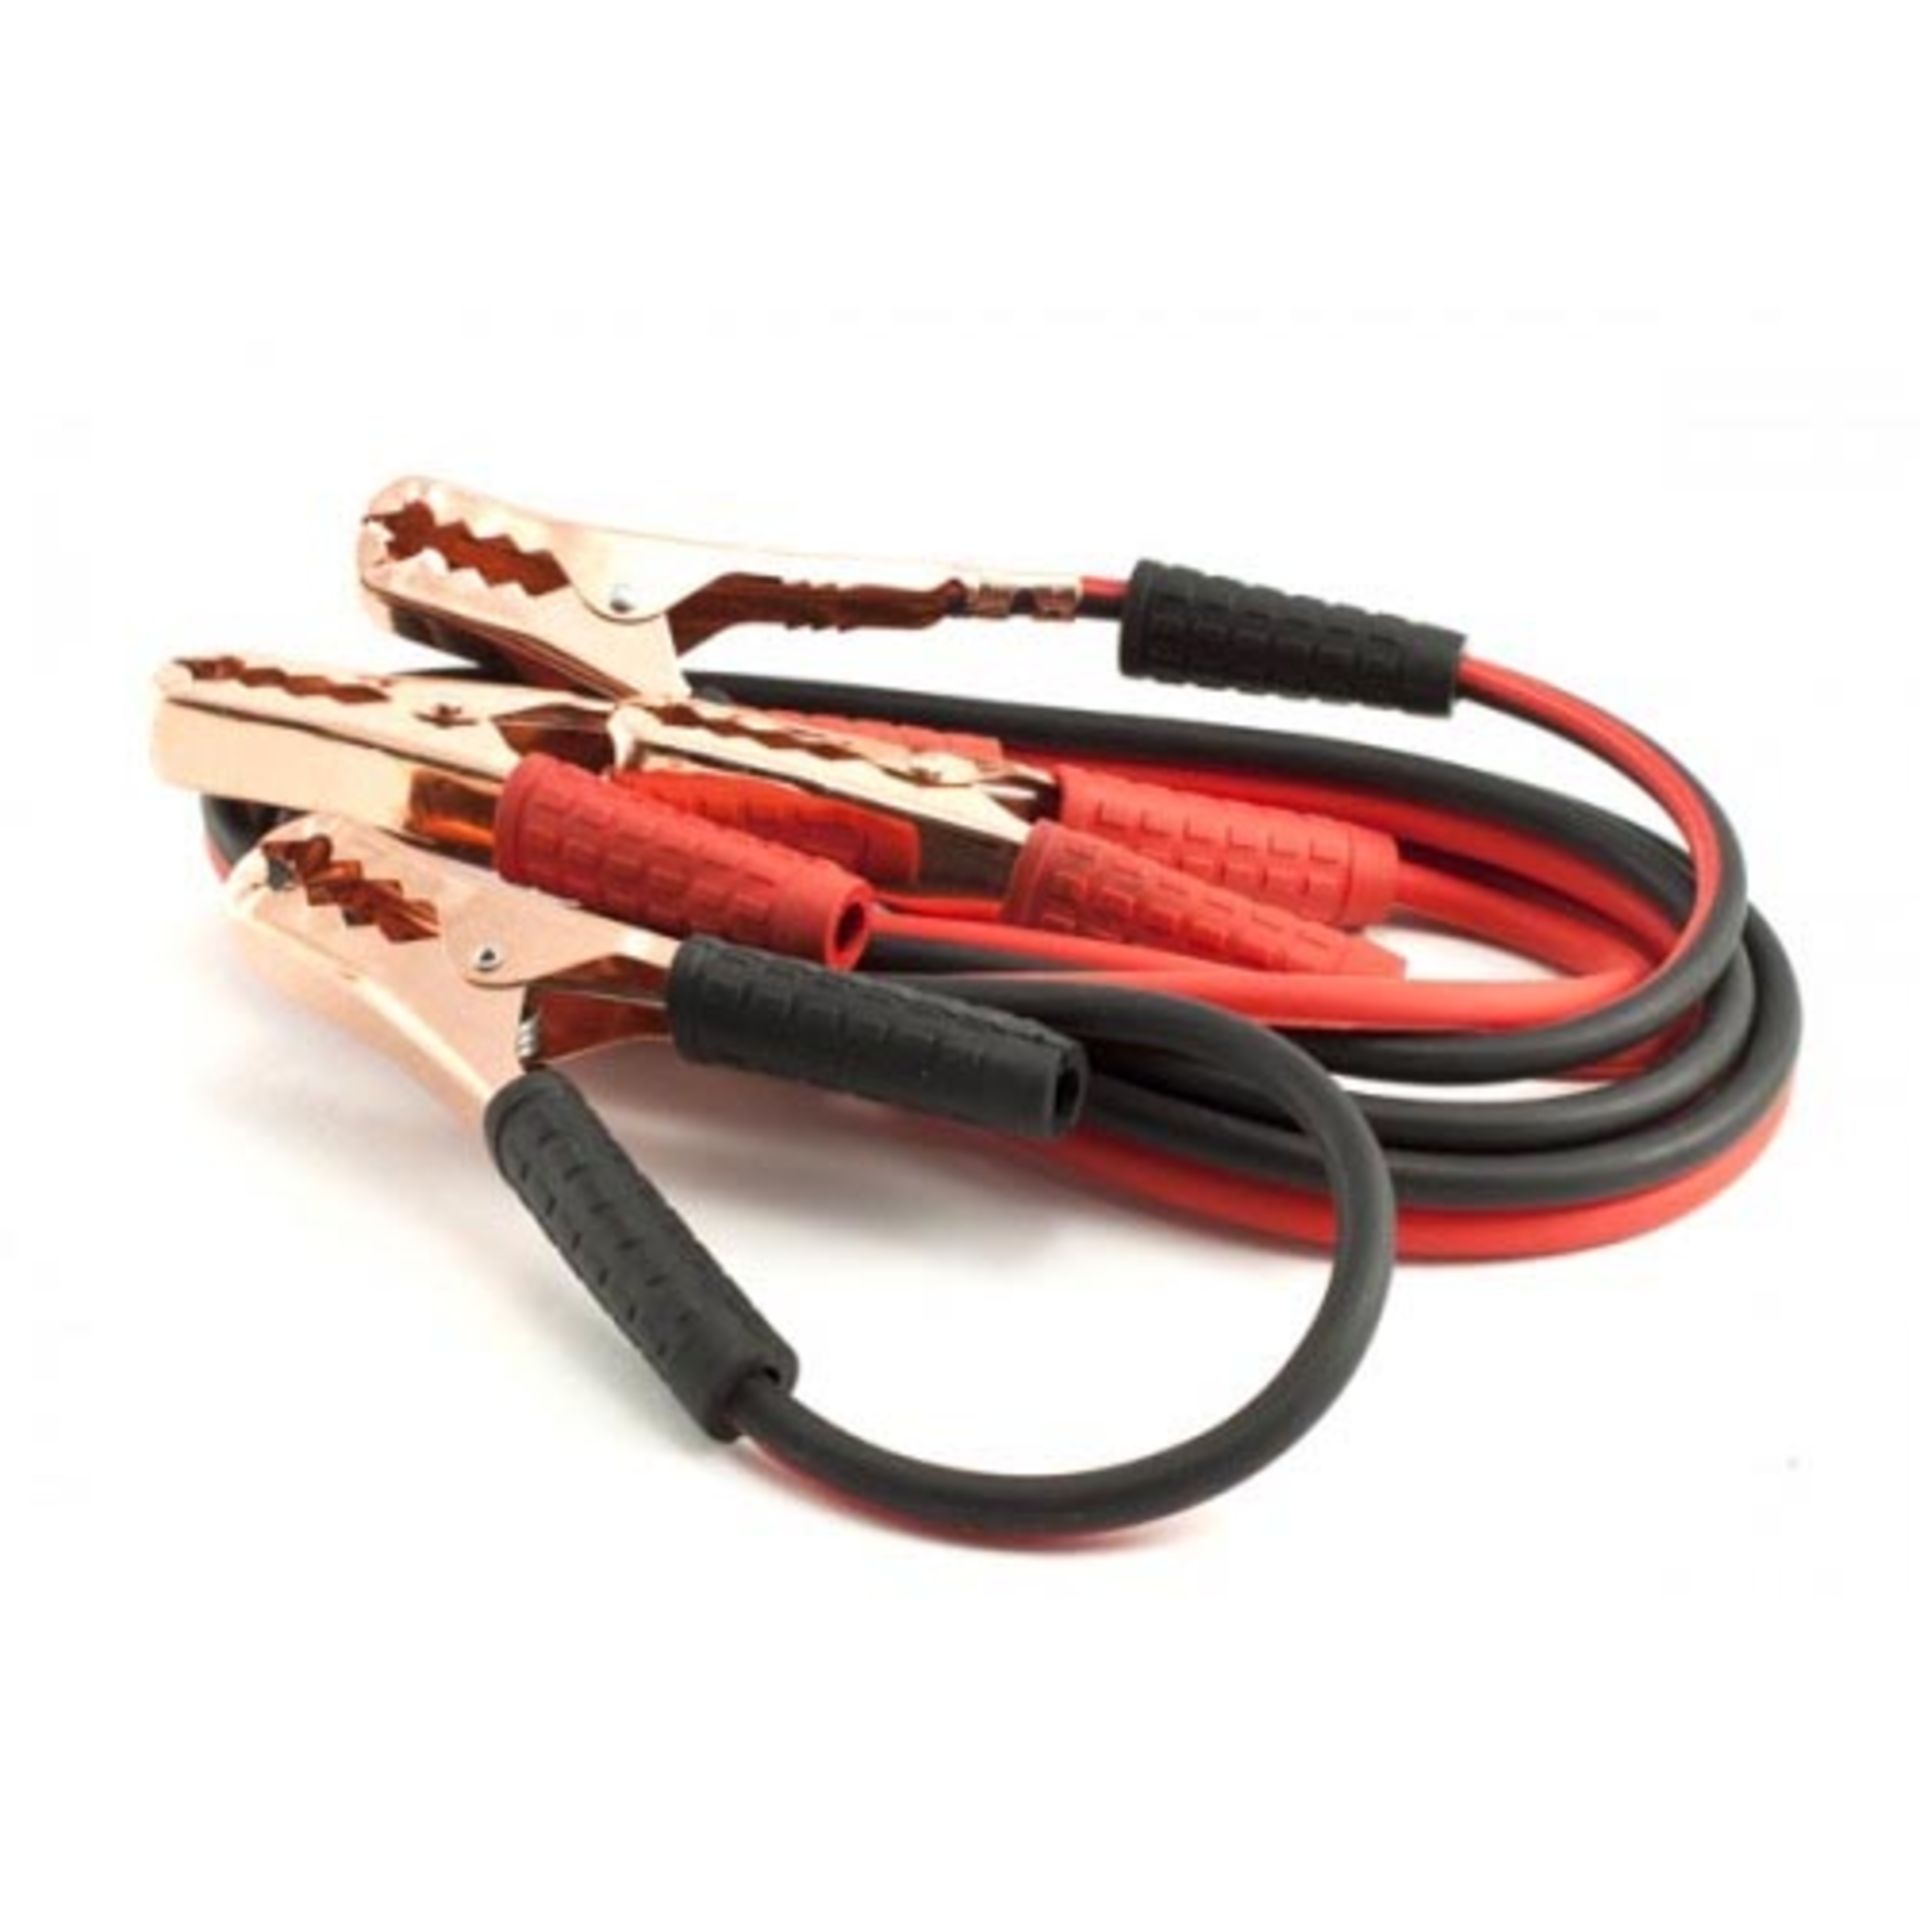 V *TRADE QTY* Brand New 200AMP Booster Cables X 8 YOUR BID PRICE TO BE MULTIPLIED BY EIGHT